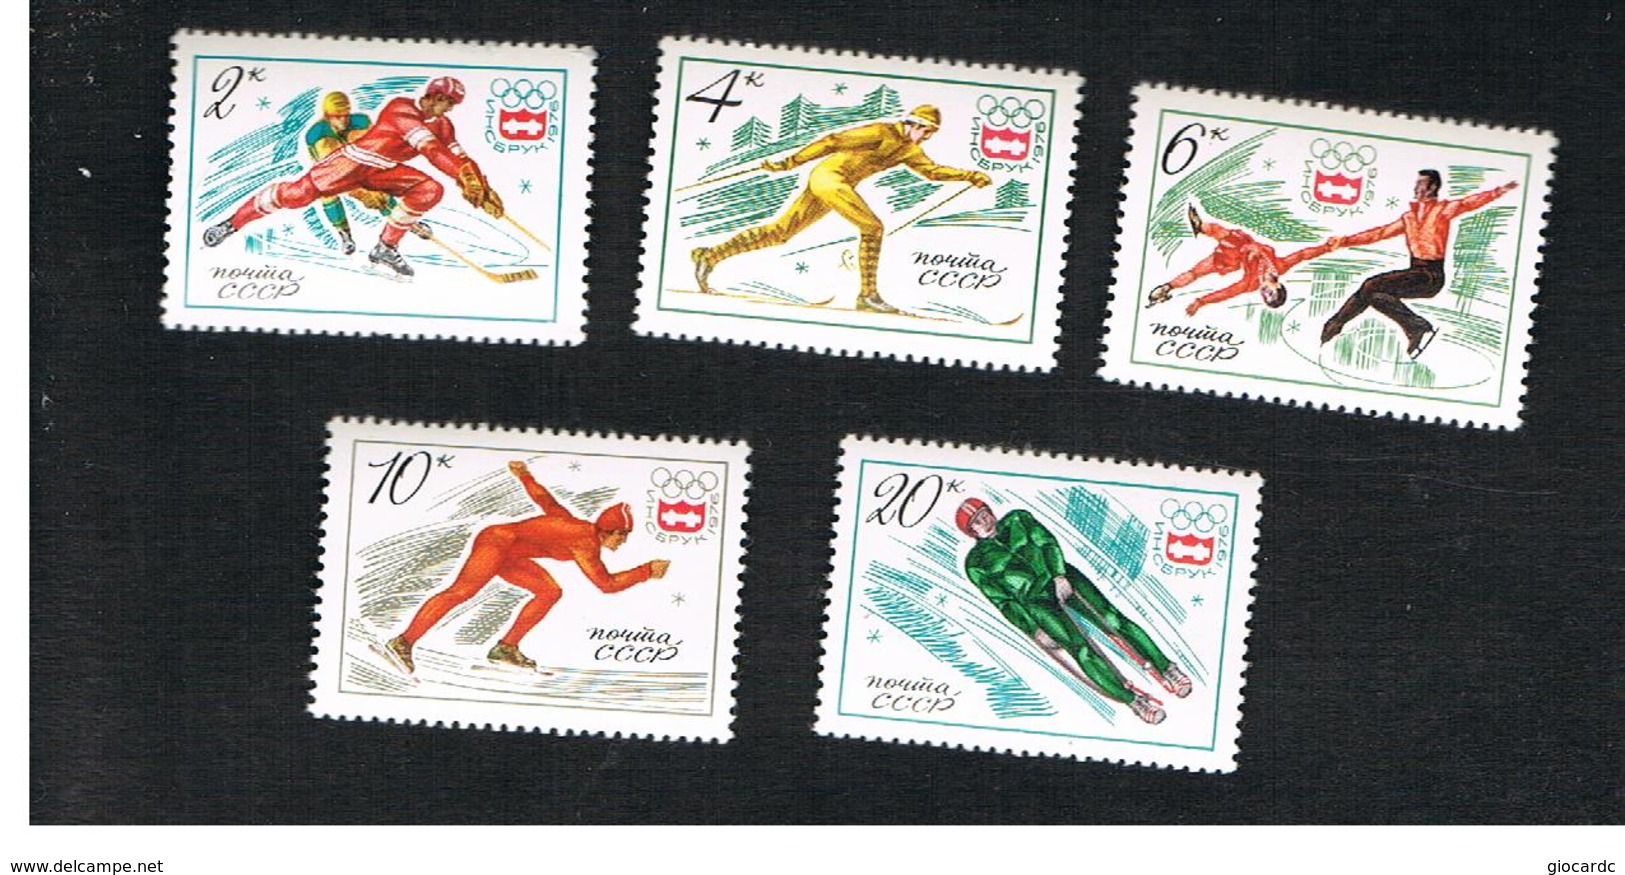 URSS -  YV. 4226.4229  -  1976 WINTER OLYMPIC GAMES  (COMPLET SET OF 5)   - MINT** - Nuovi